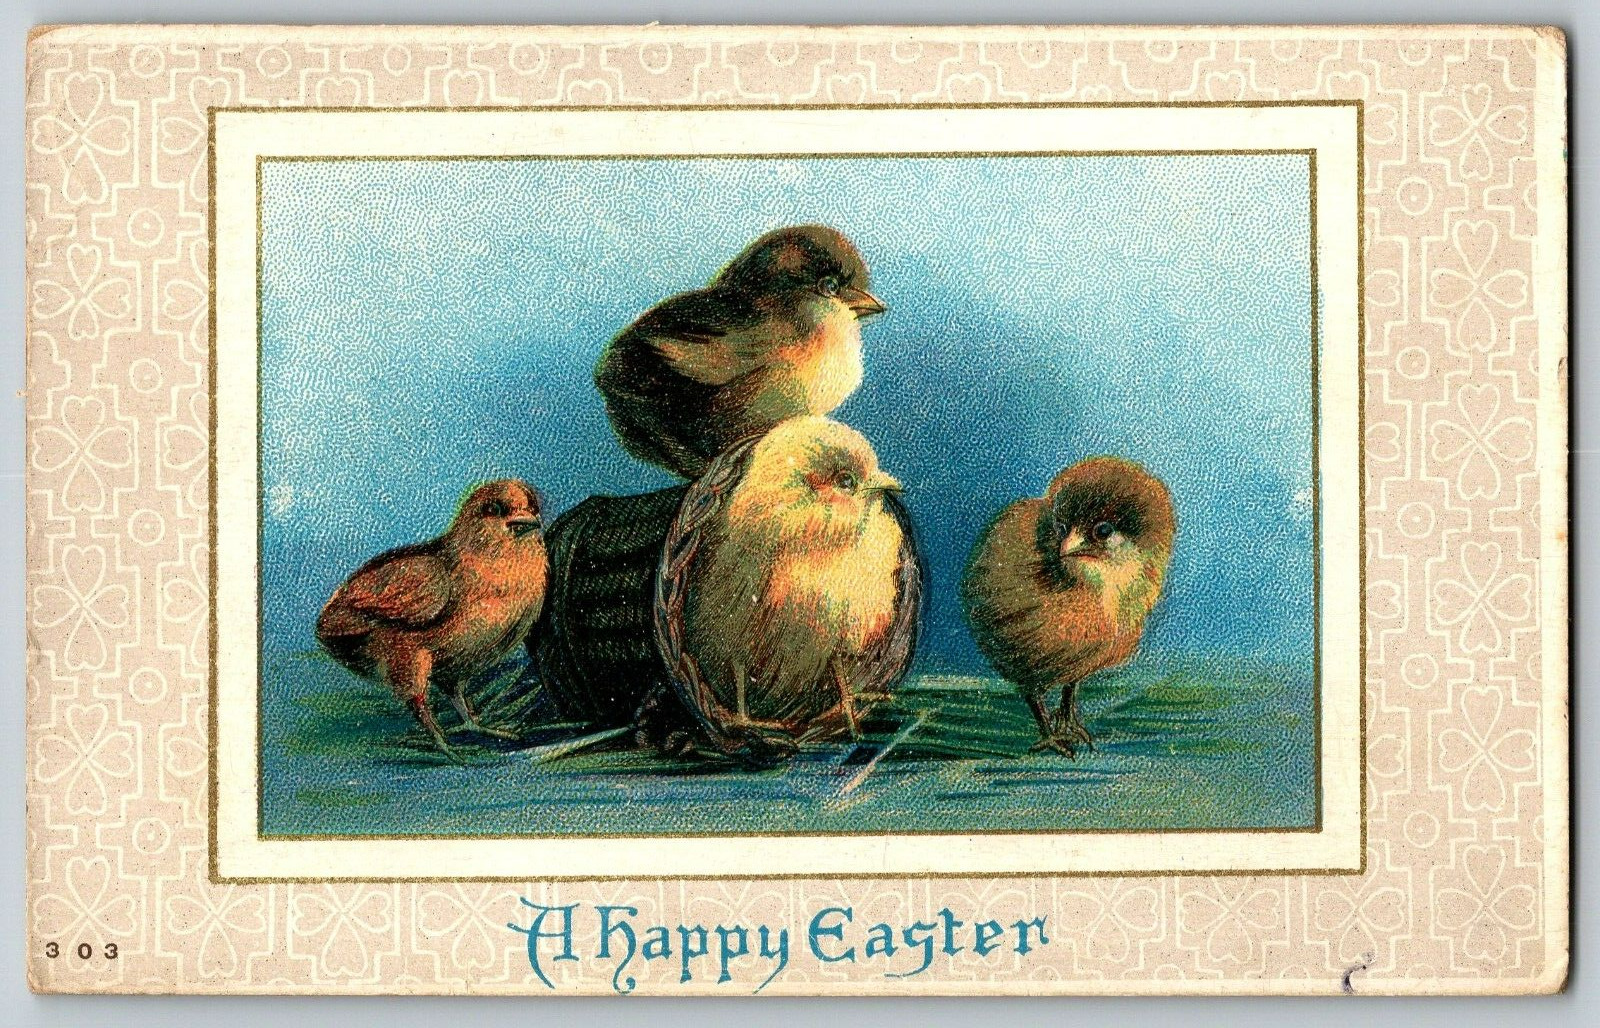 A Happy Easter - Chicks in the Basket - Vintage Postcard, Posted 1912